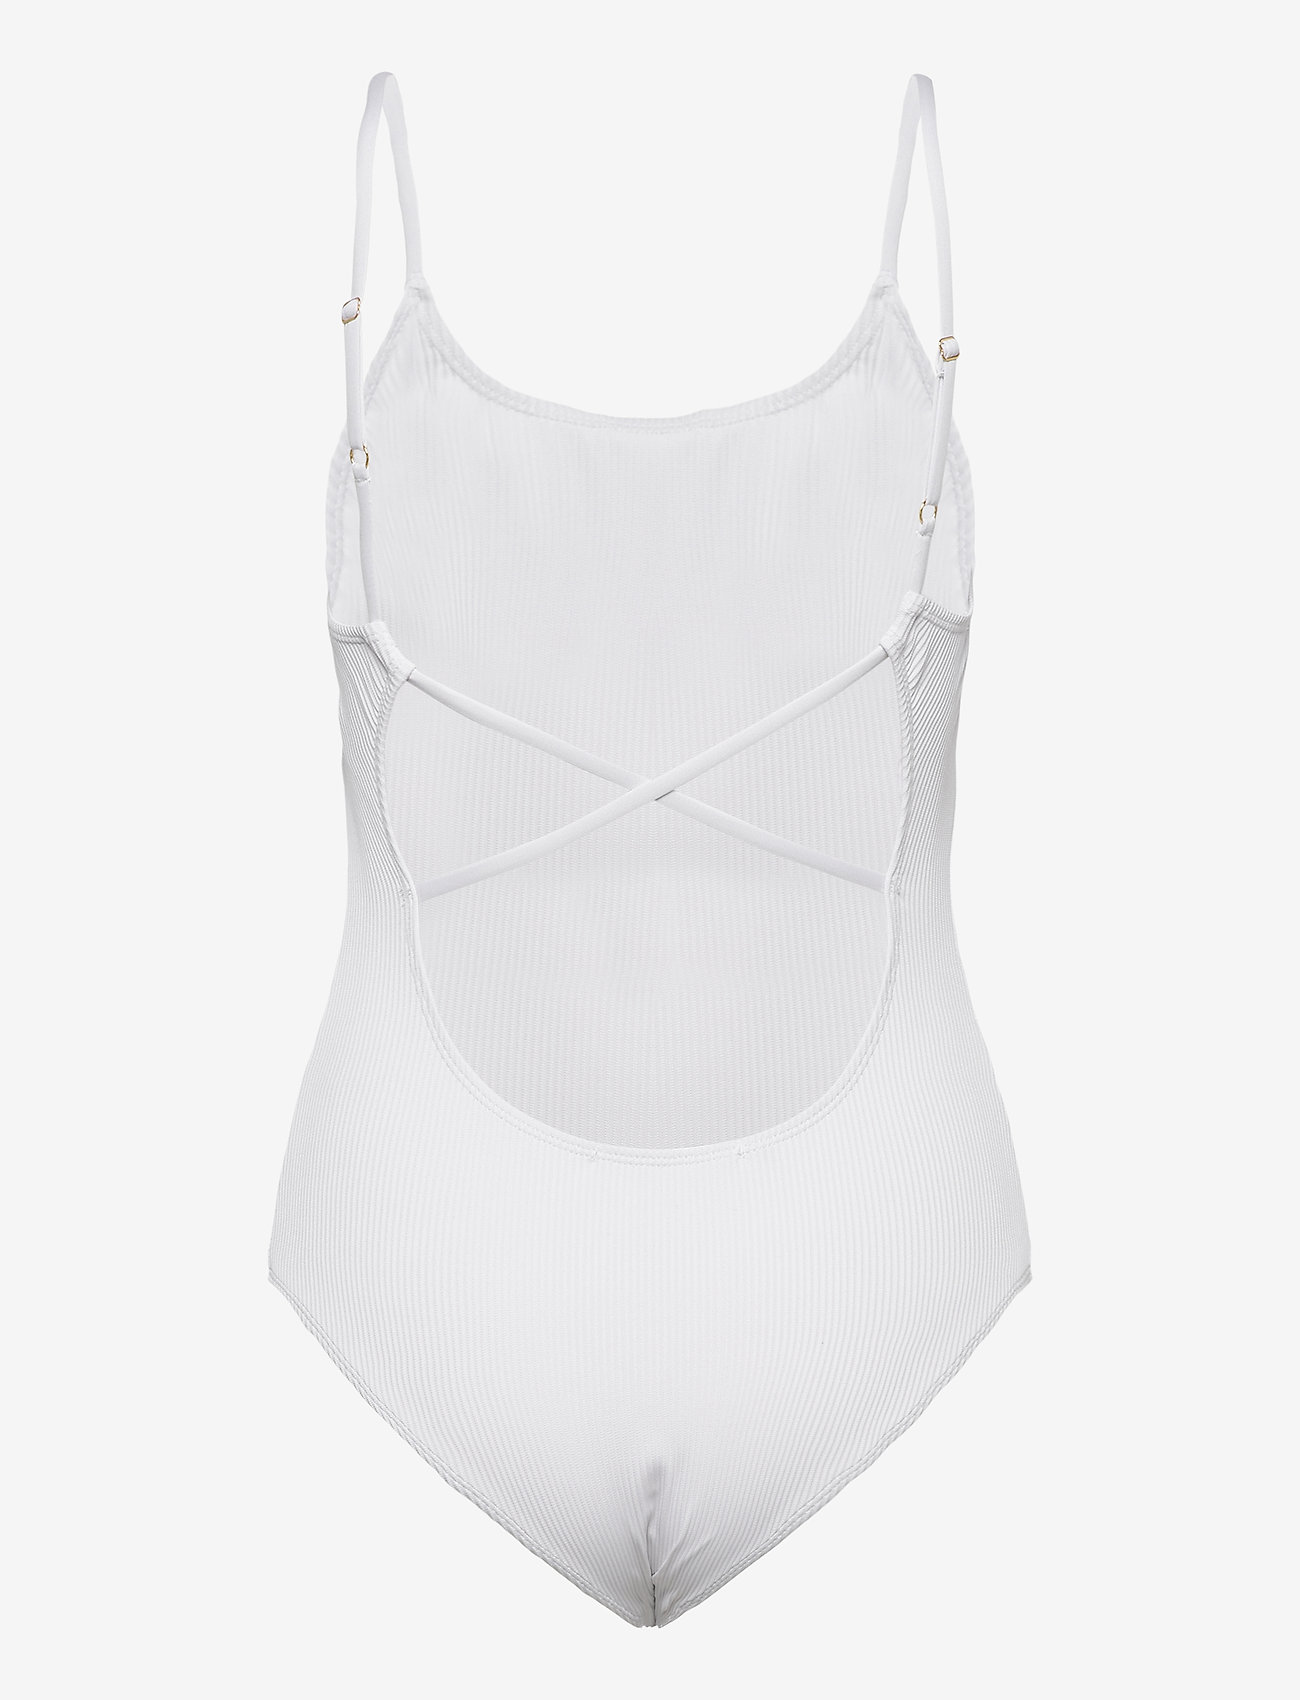 Underprotection - Adrianna swimsuit - badedragter - white - 1